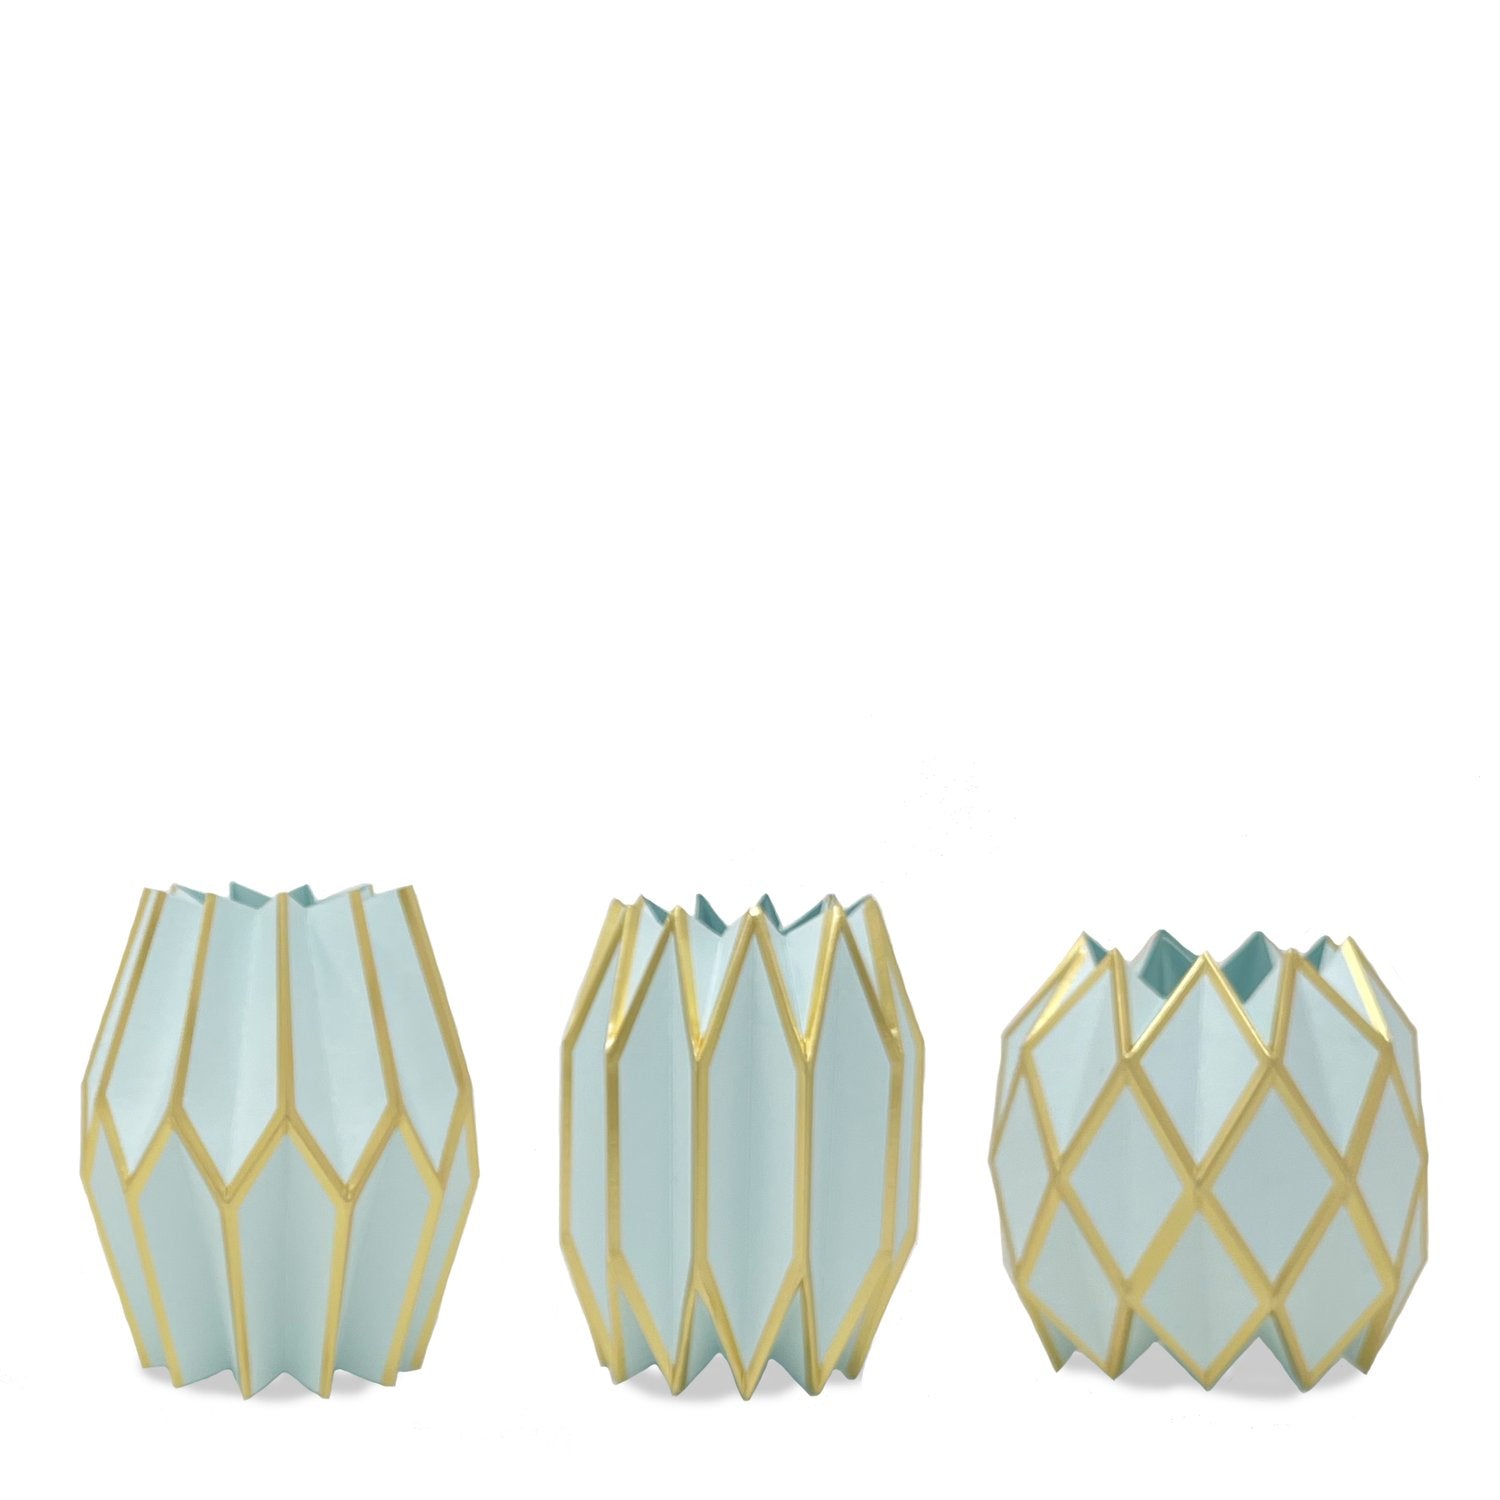 Lucy Grymes Tiffany Blue paper vase wrap